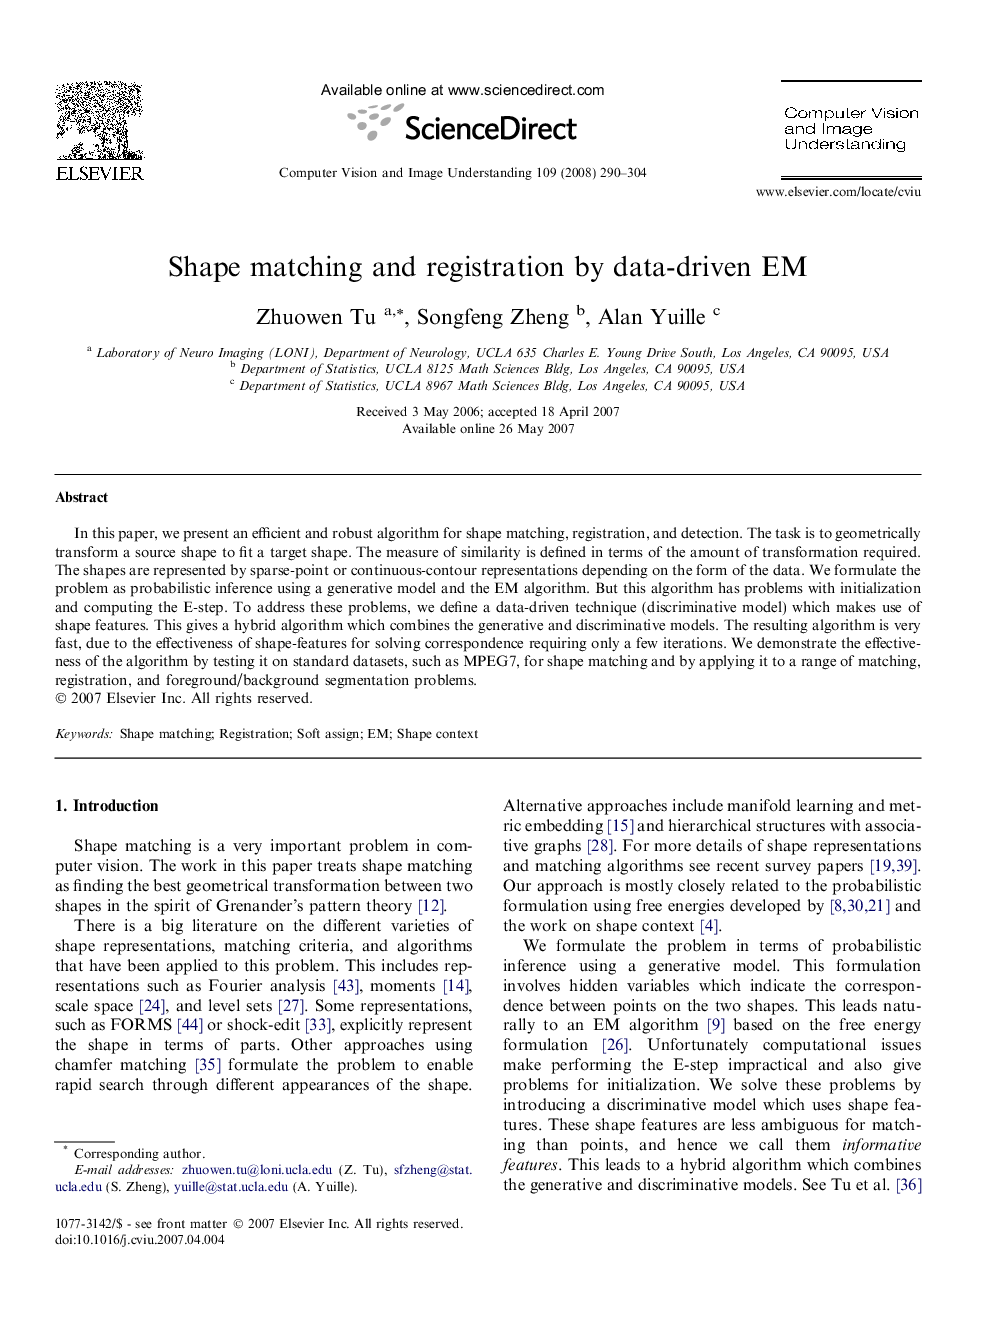 Shape matching and registration by data-driven EM